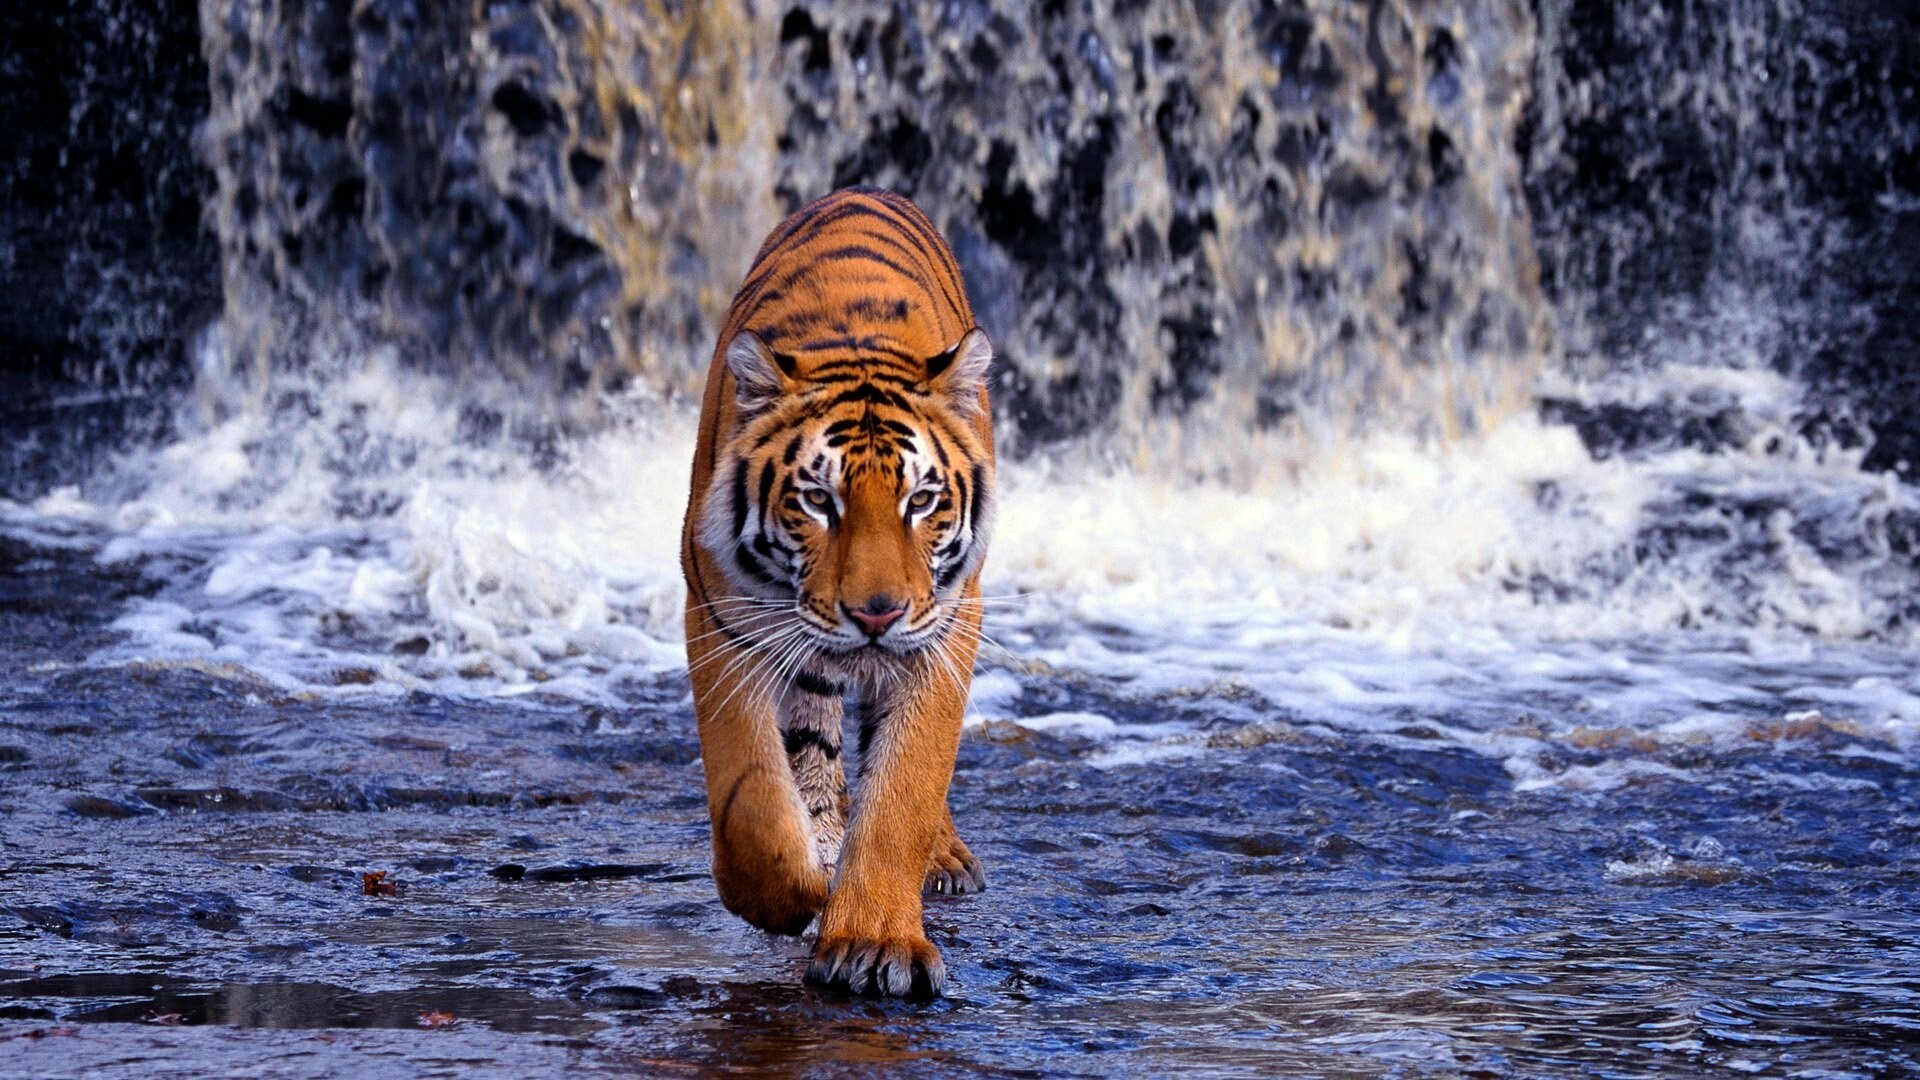 Tiger: One of the world’s most recognizable animals, intimately connected with strength and untamed nature. 1920x1080 Full HD Background.